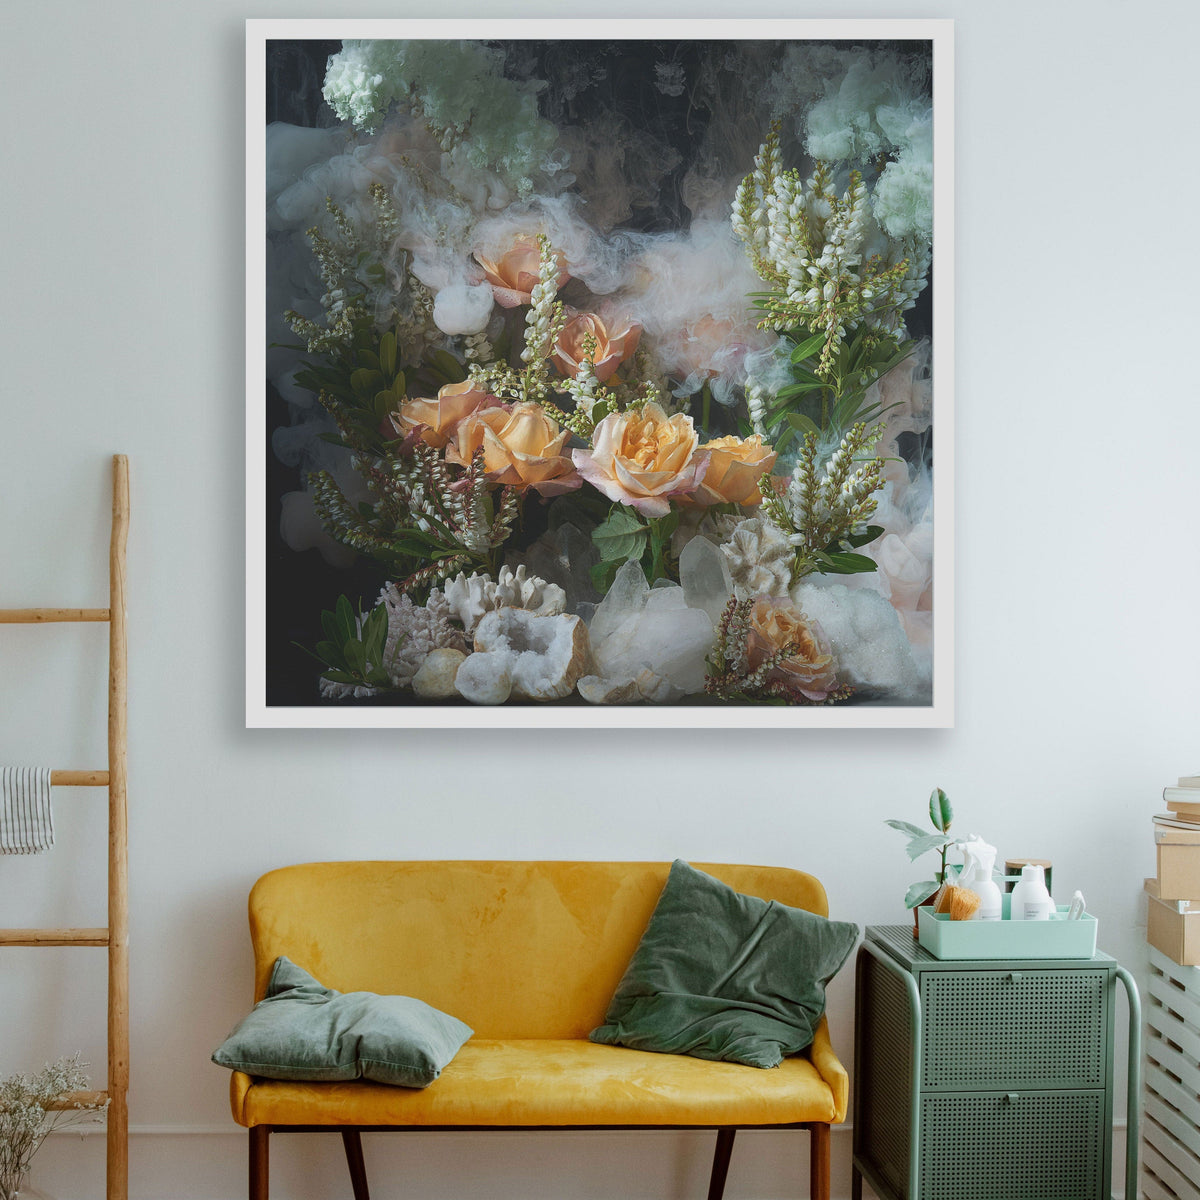 Floral Apparations Limited Edition Photographic Print by Georgie Malyon